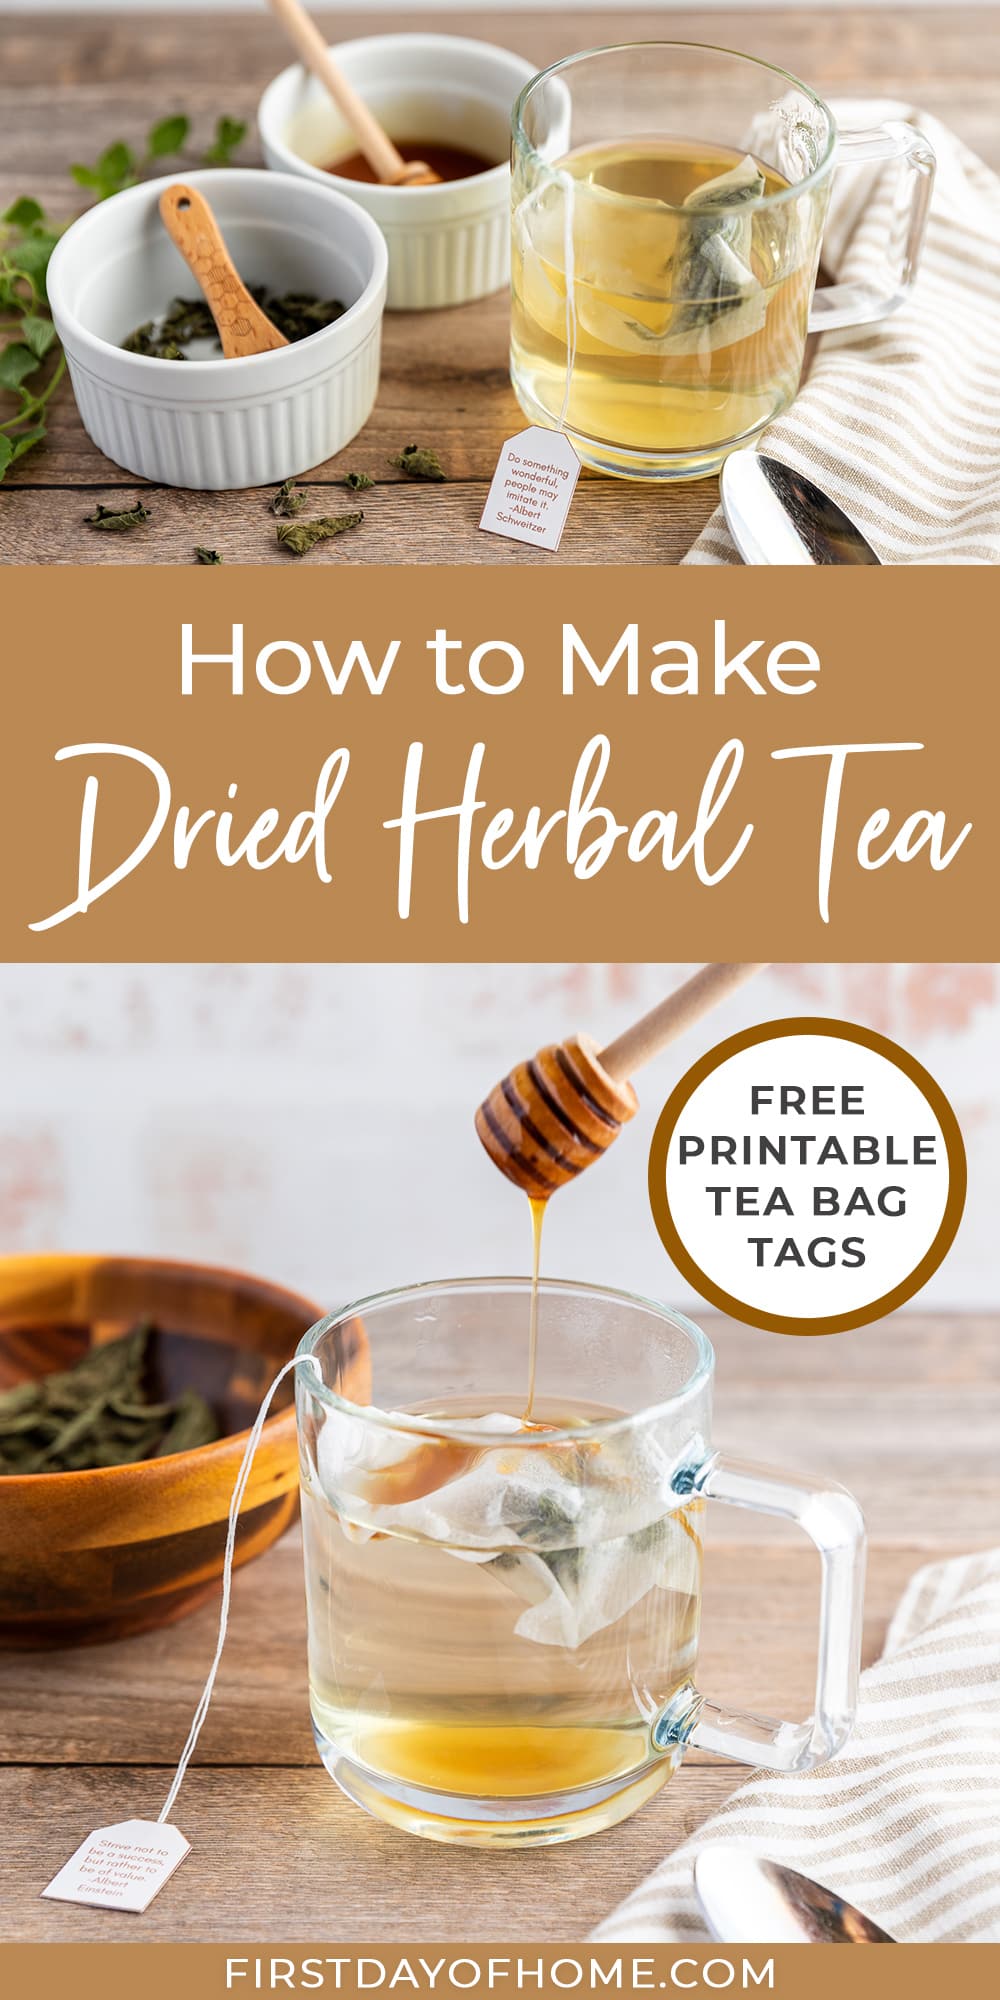 Herbal tea made with dried herbs, shown with honey and tea towels. Text overlay reads "How to Make Dried Herbal Tea".